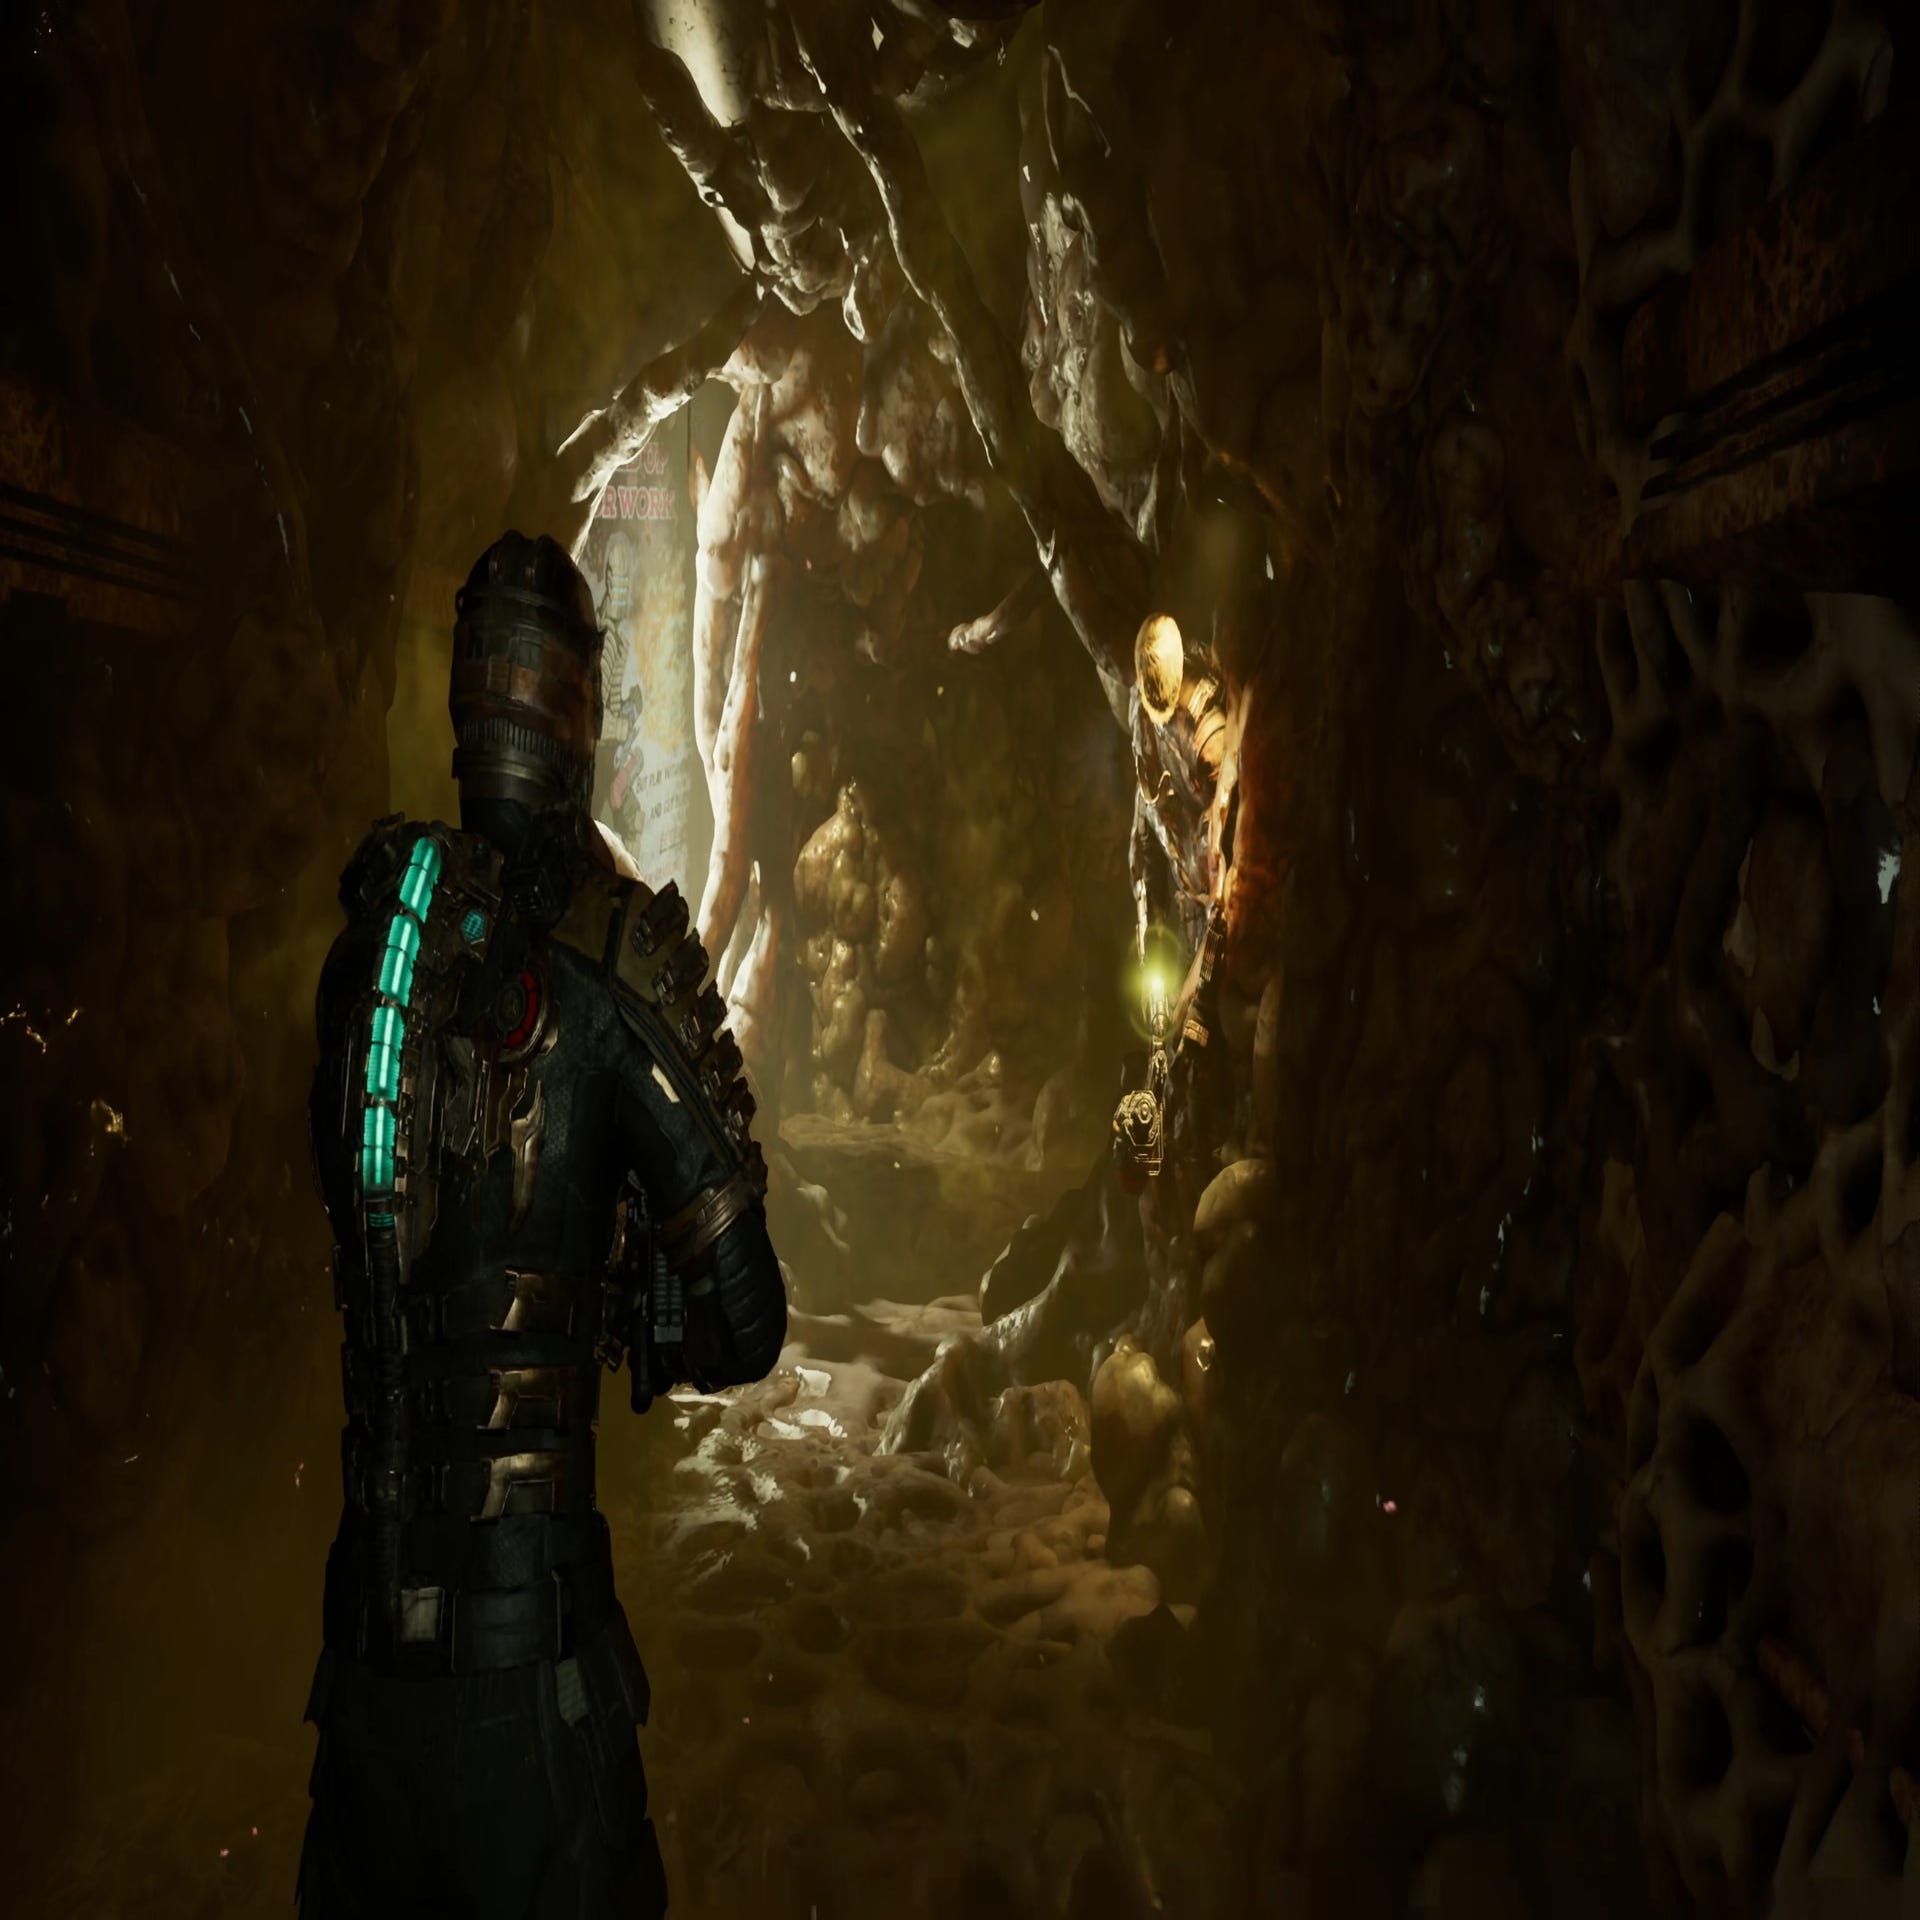 Dead Space tech review: this is what a best-in-class remake looks like